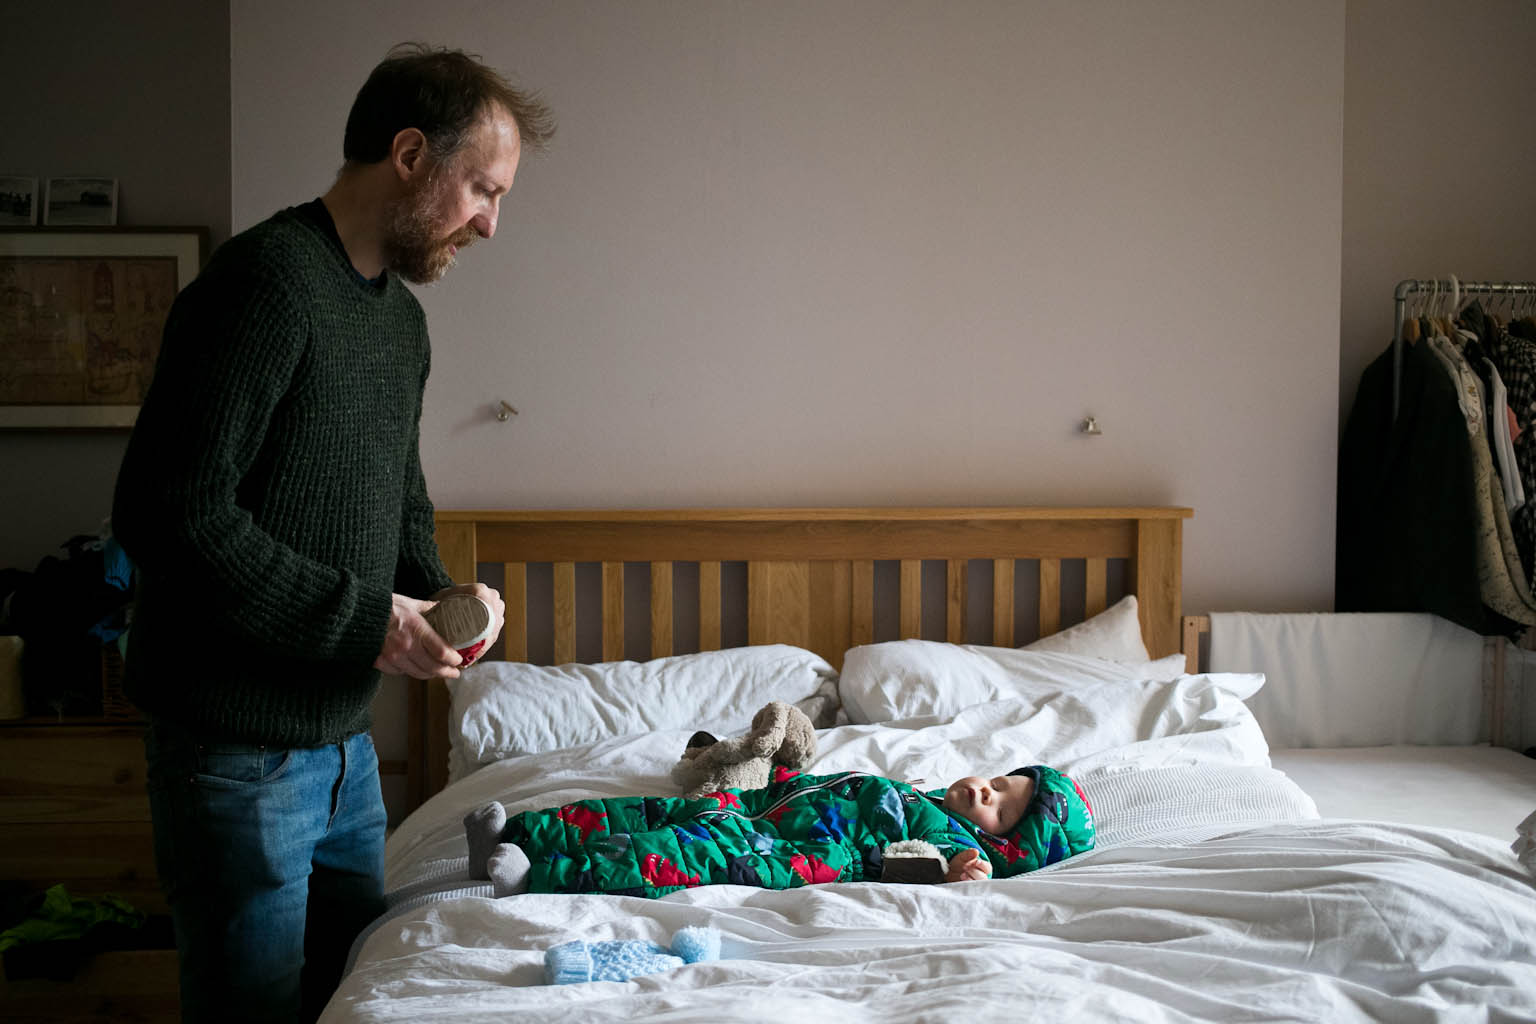 Father holding little shoe looking at sleeping baby boy on bed wearing outdoor suit